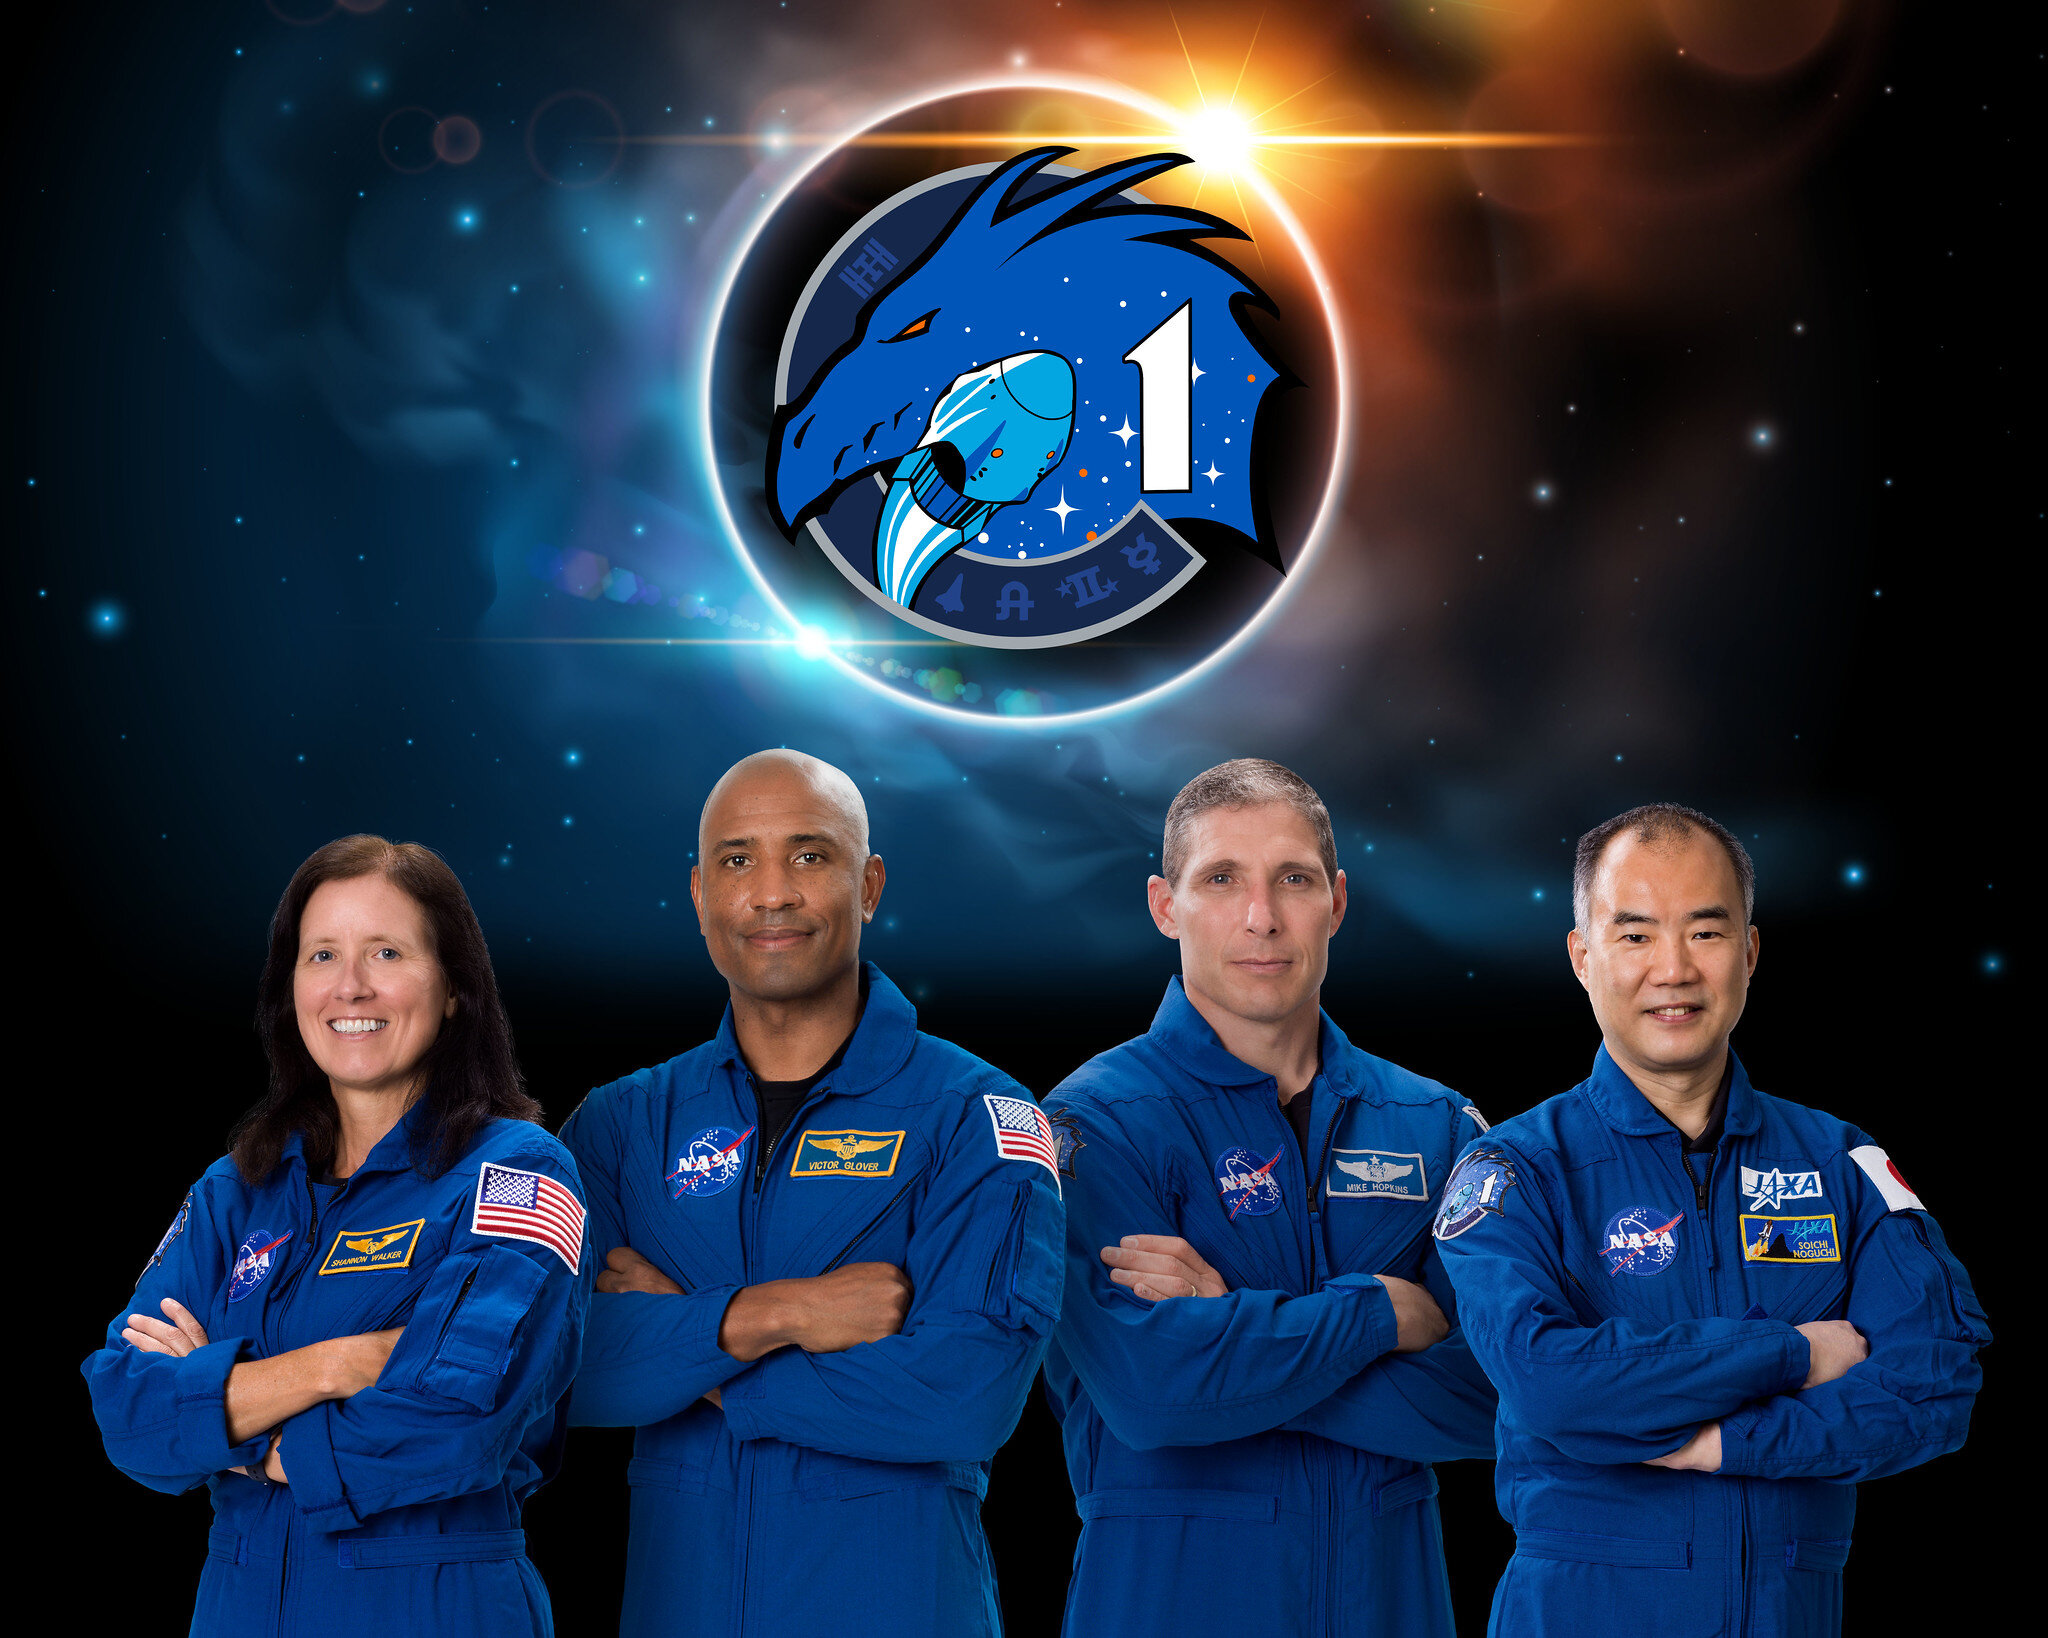 PICTURED: The SpaceX Crew-1 official crew portrait with (from left) NASA astronauts Shannon Walker, Victor Glover, Mike Hopkins, and JAXA (Japan Aerospace Exploration Agency) astronaut Soichi Noguchi.